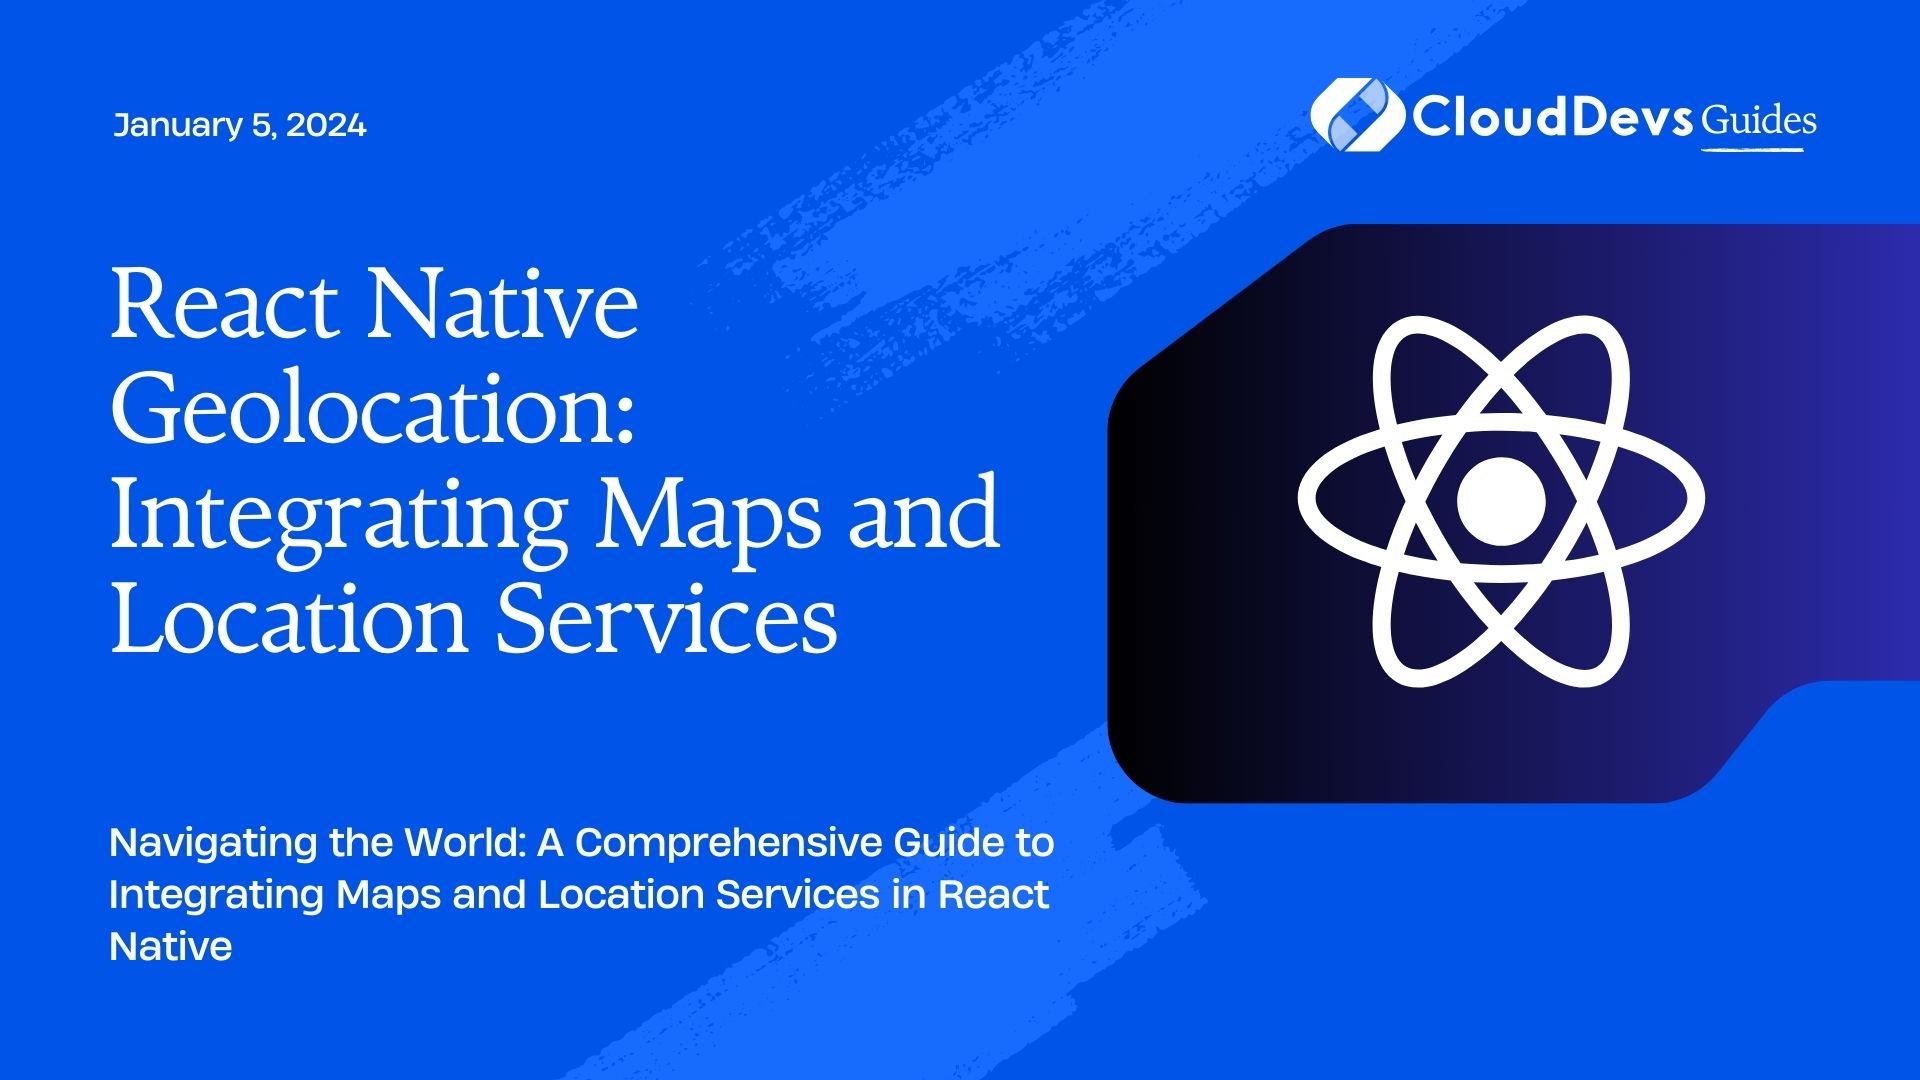 React Native Geolocation: Integrating Maps and Location Services